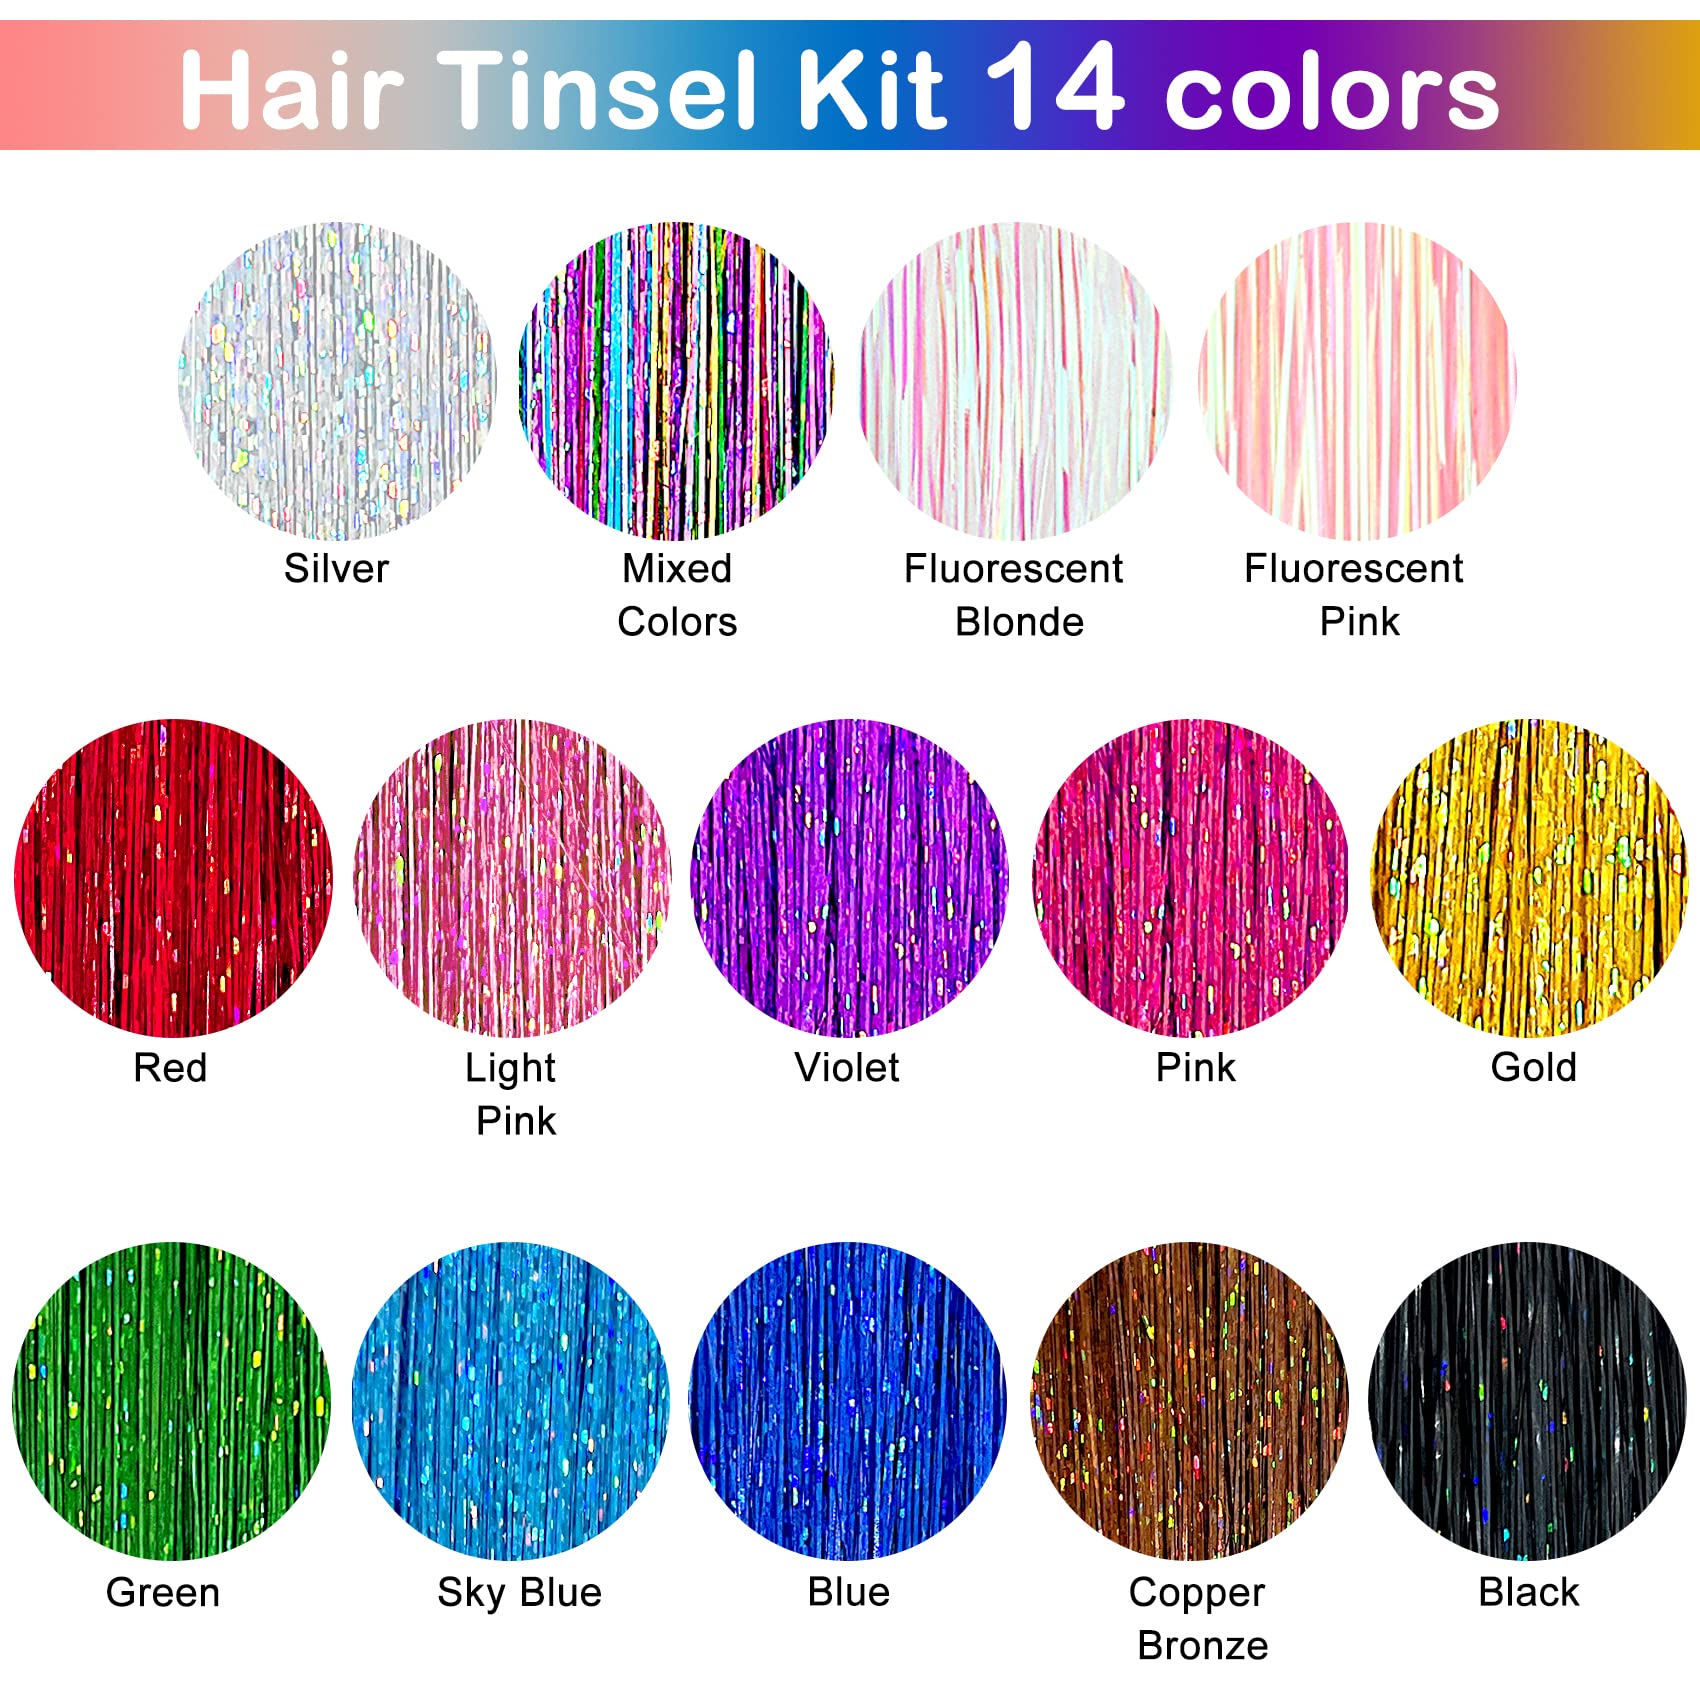 ALFIE DARLING Hair Tinsel Kit (48 Inch,14 colors, 3500 strands), Tinsel Hair Extensions with Tools, Heat Resistant Fairy Hair Tinsel Kit for W